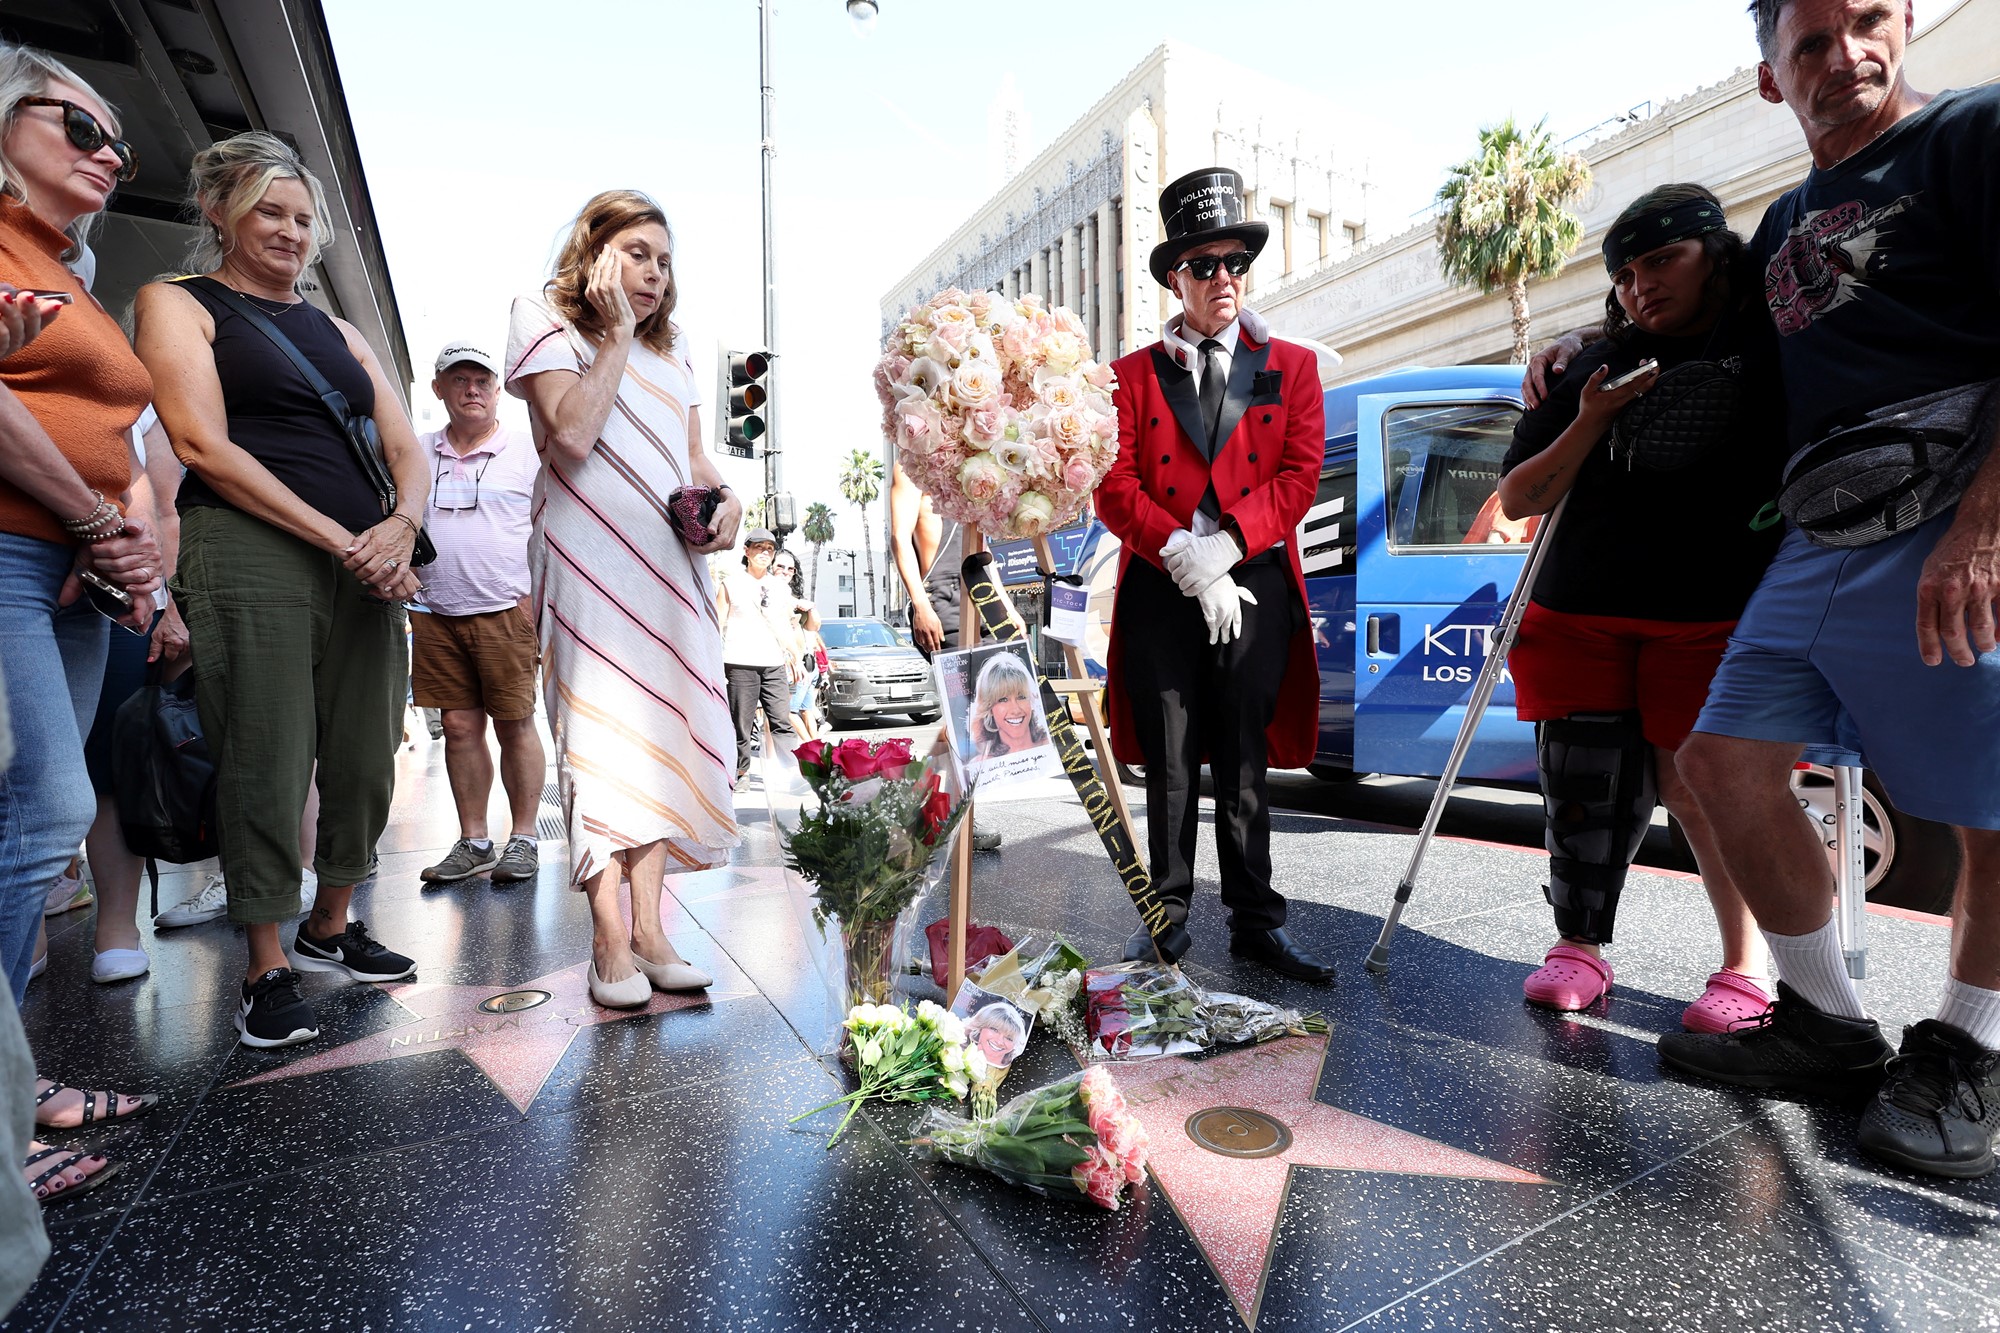 A mourner stands next to a tribute to Olivia Newton-John.